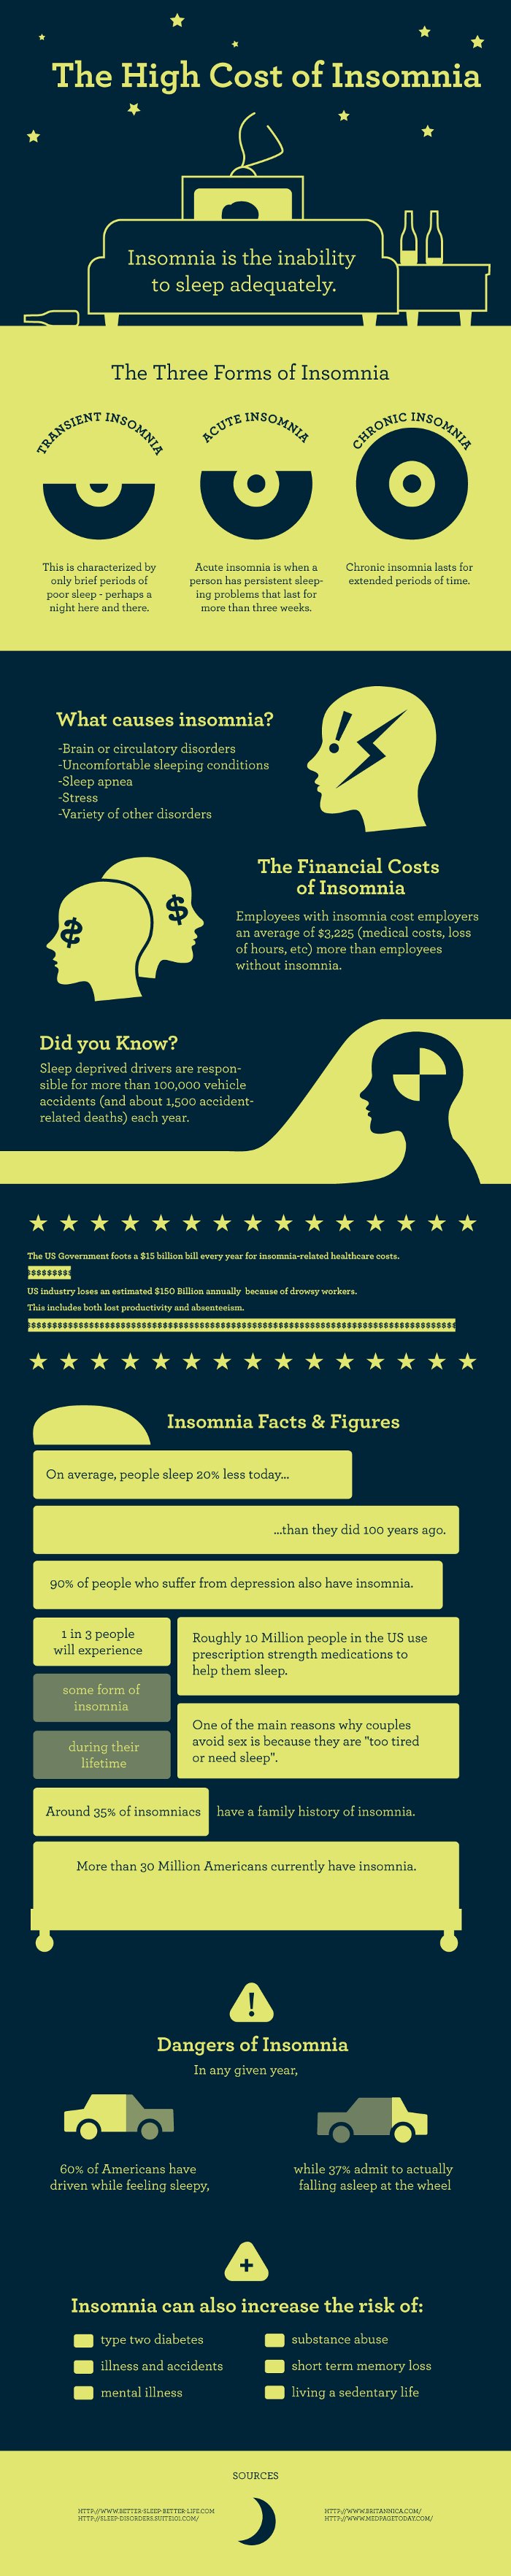 Effects of Insomnia